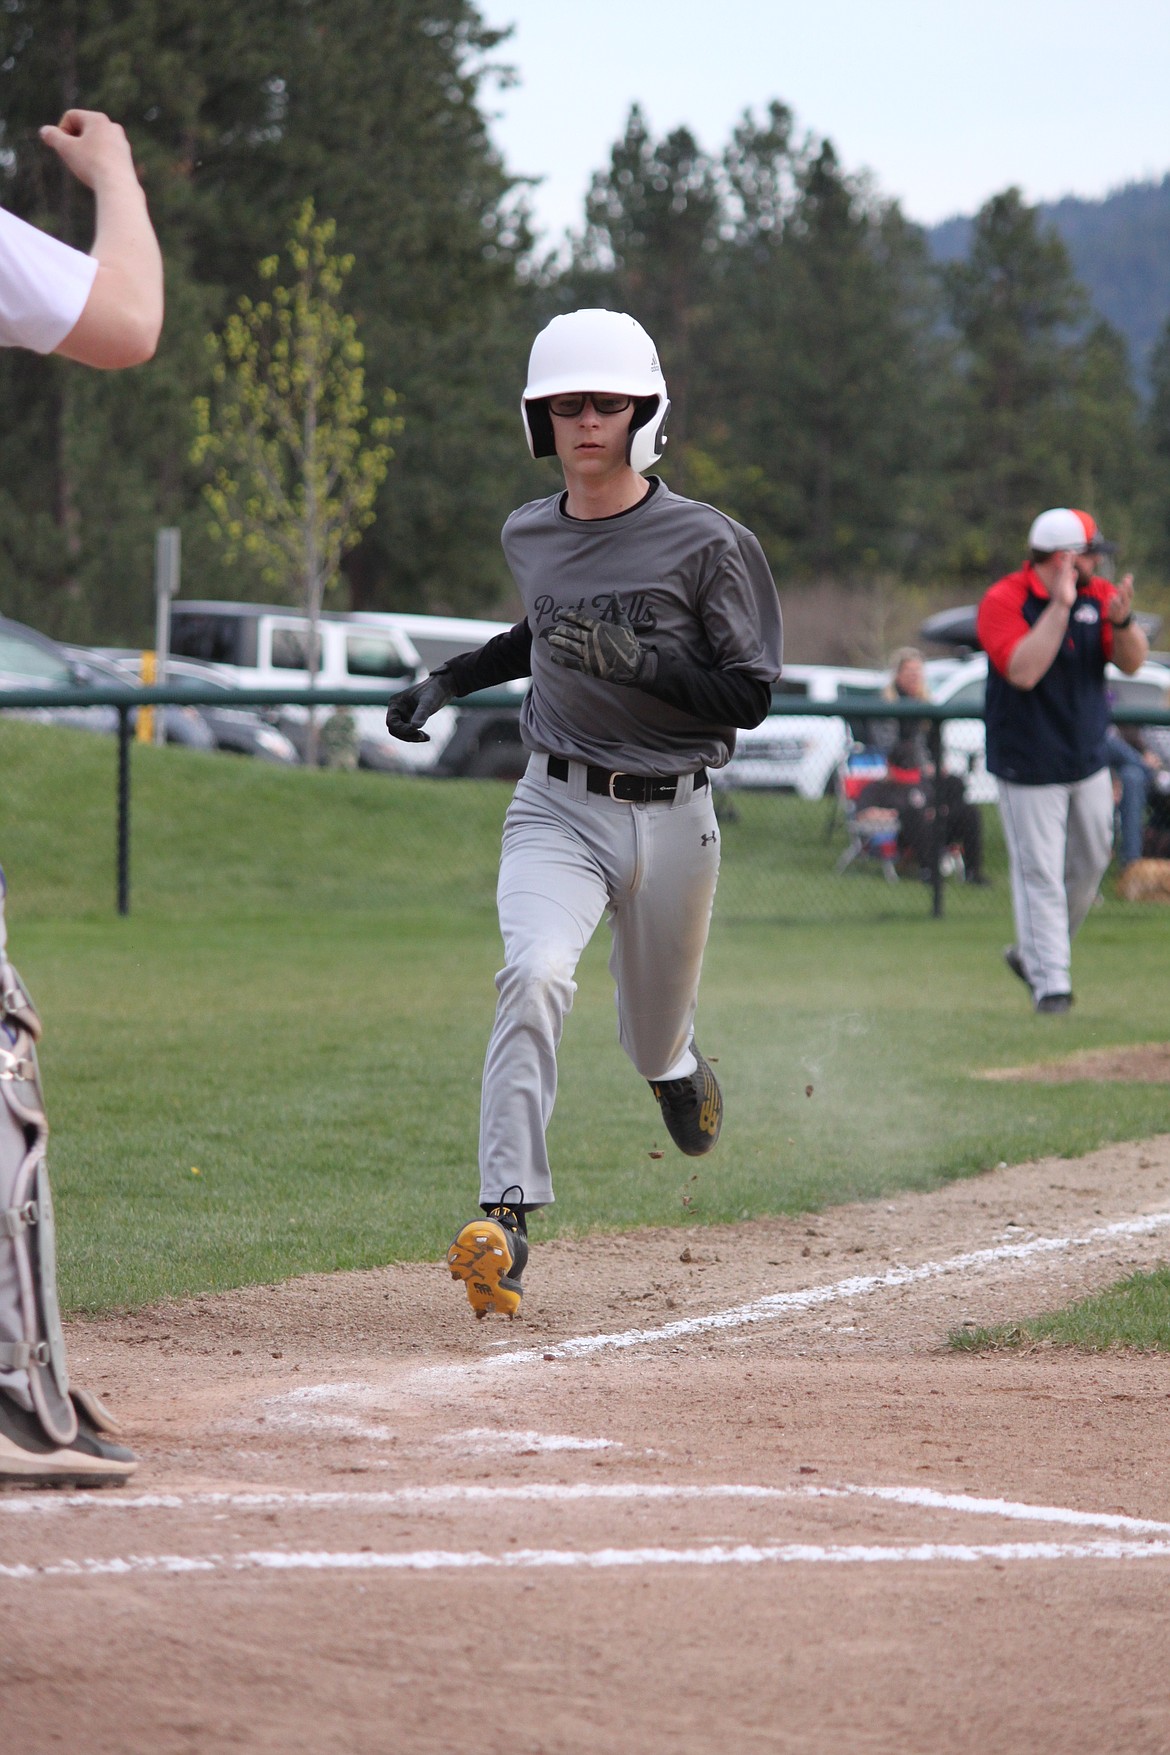 Courtesy photo
Colton Gookin of Post Falls scores a run against Coeur d'Alene No. 2 in a Little League Juniors game on May 4.